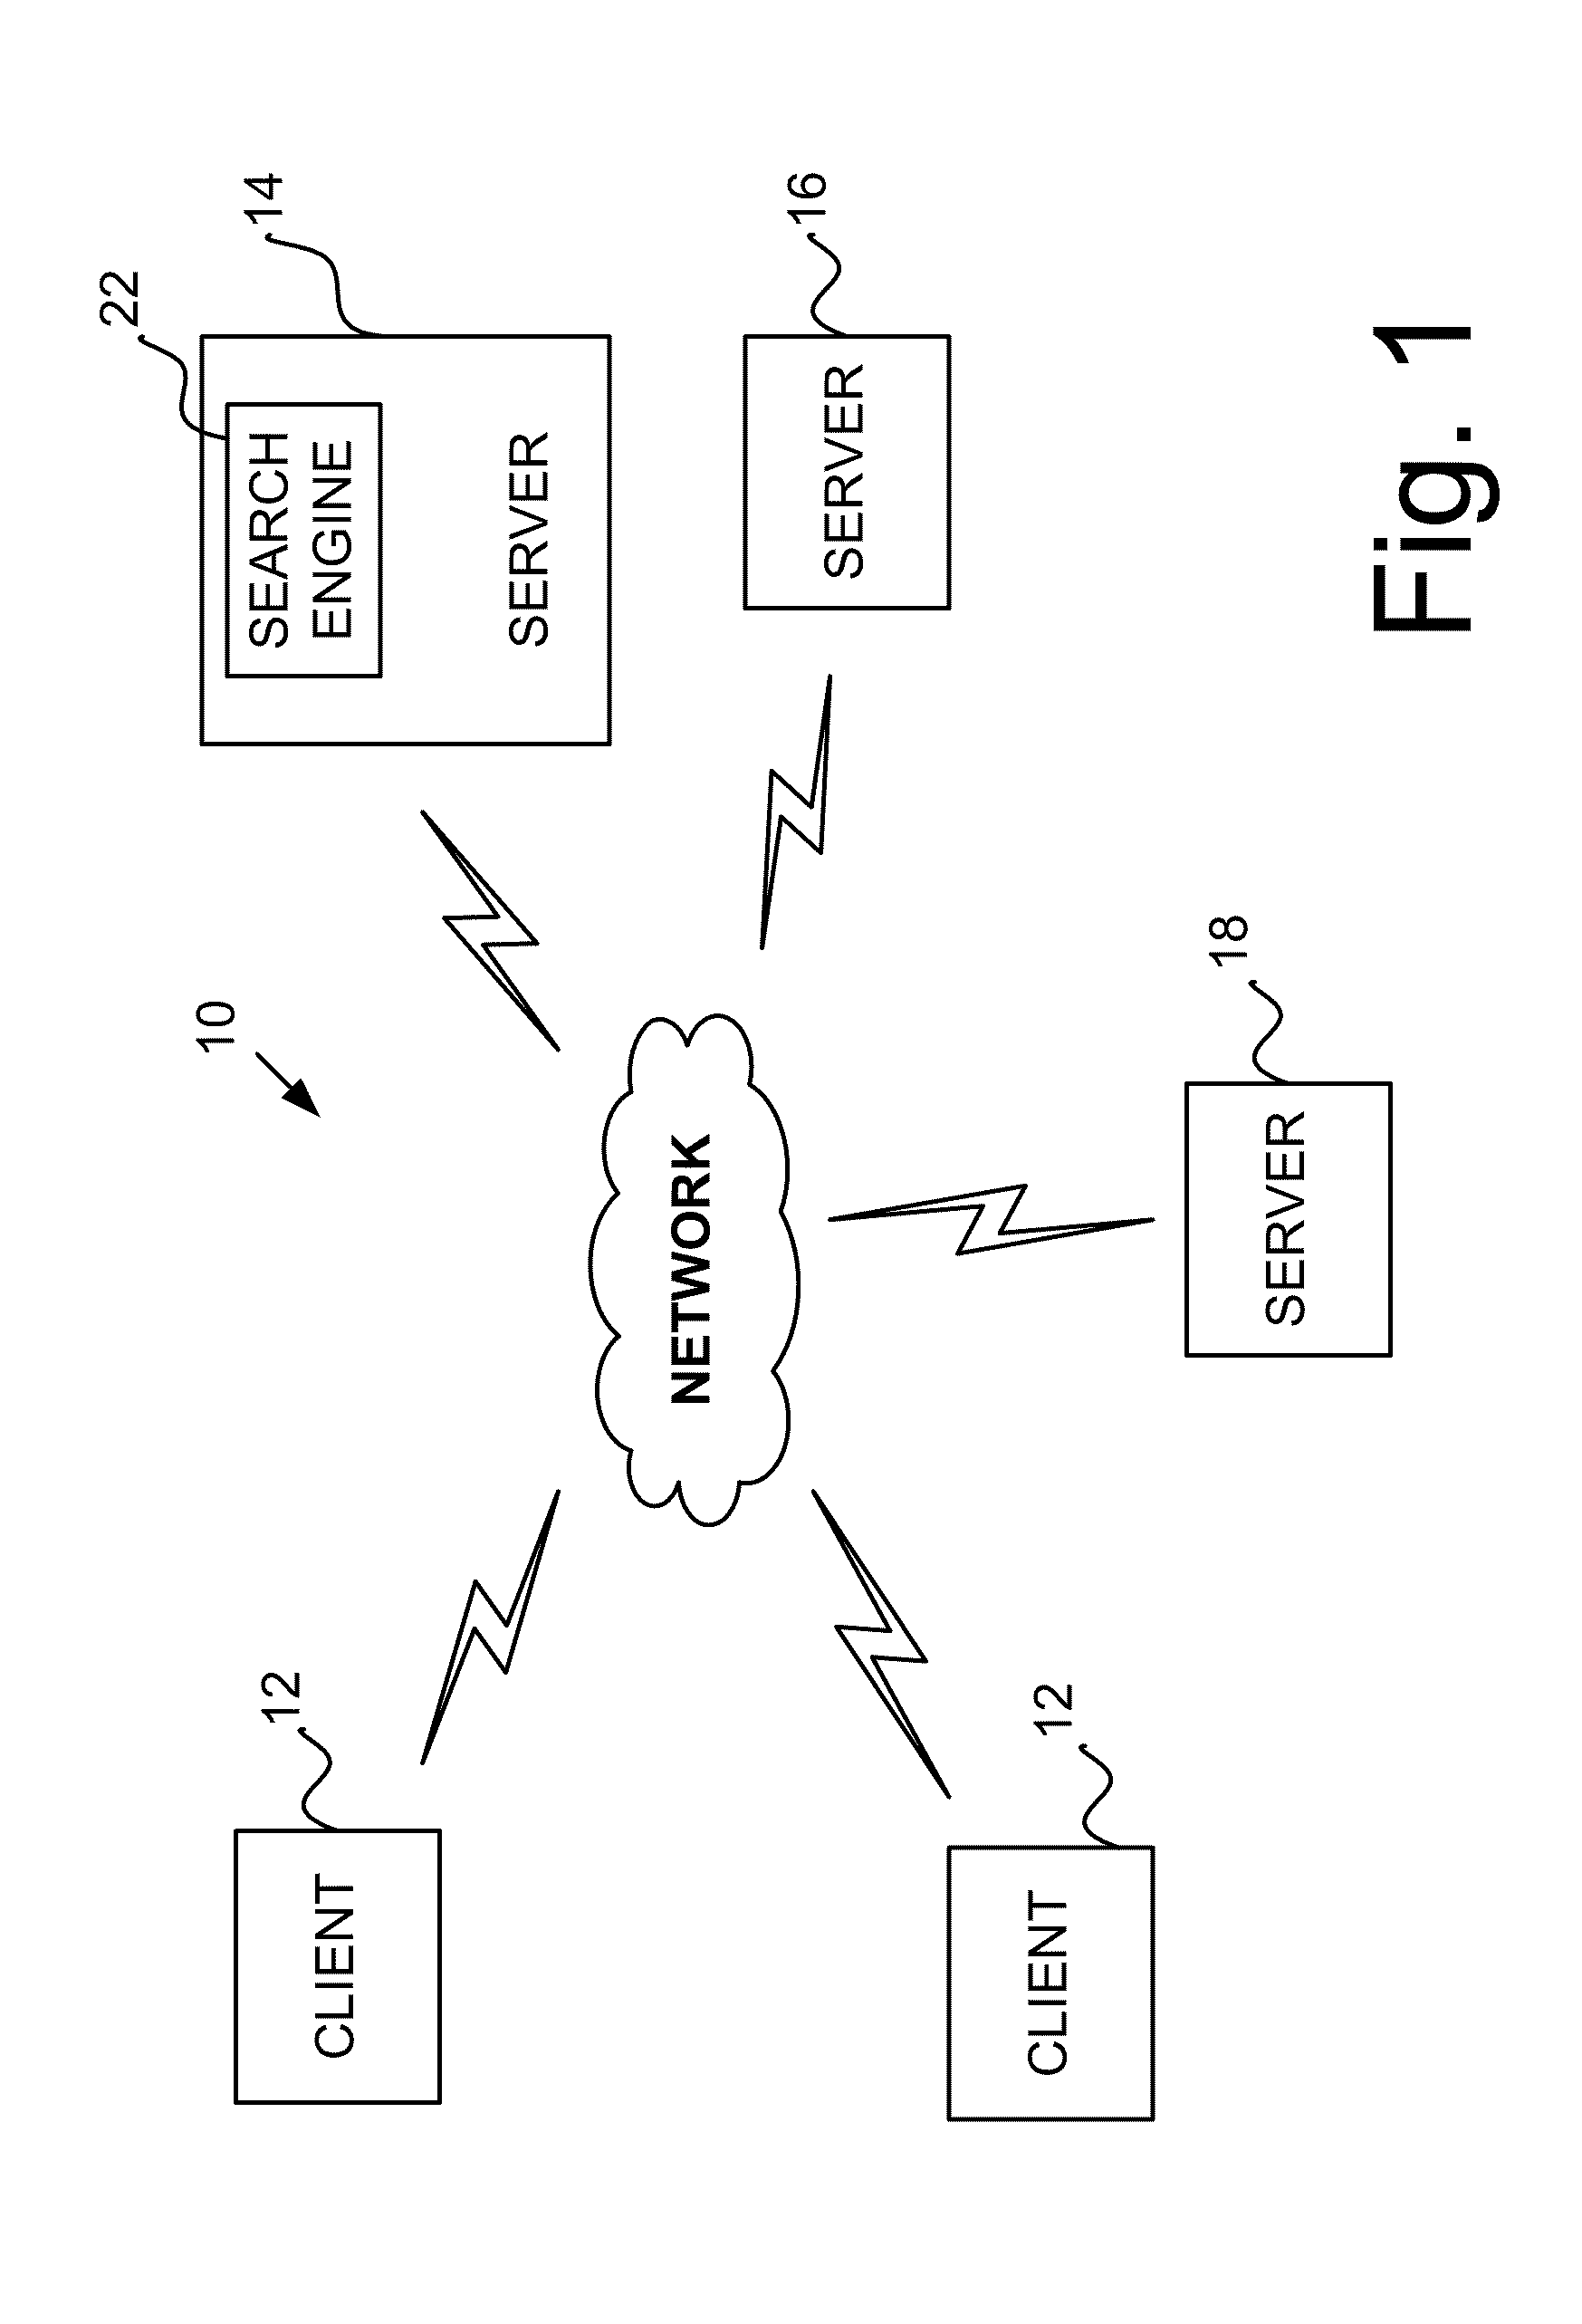 Method of scanning, analyzing and identifying electro magnetic field sources